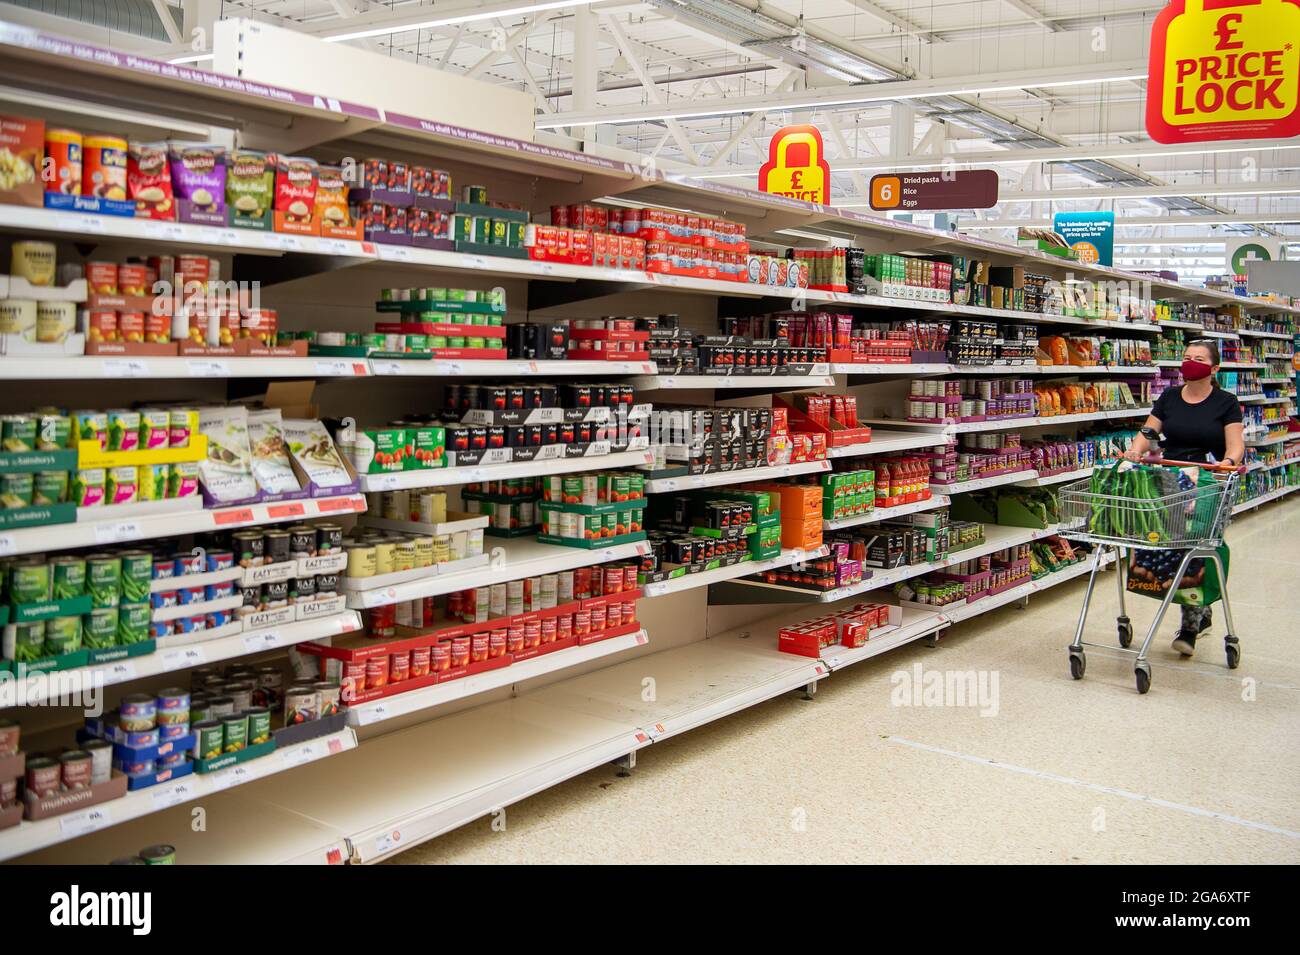 Taplow, Buckinghamshire, UK. 29th July, 2021. Some customers have been panic buying tinned food leaving some gaps in the shelves, however, Sainsbury's Supermarket in Taplow was well stocked this morning. There are some supply chain issues in general with supermarkets due to HGV lorry driver shortages as well as supply chain production staff having to self isolate due to having been pinged by the Covid-19 NHS Track and Trace app. Credit: Maureen McLean/Alamy Live News Stock Photo